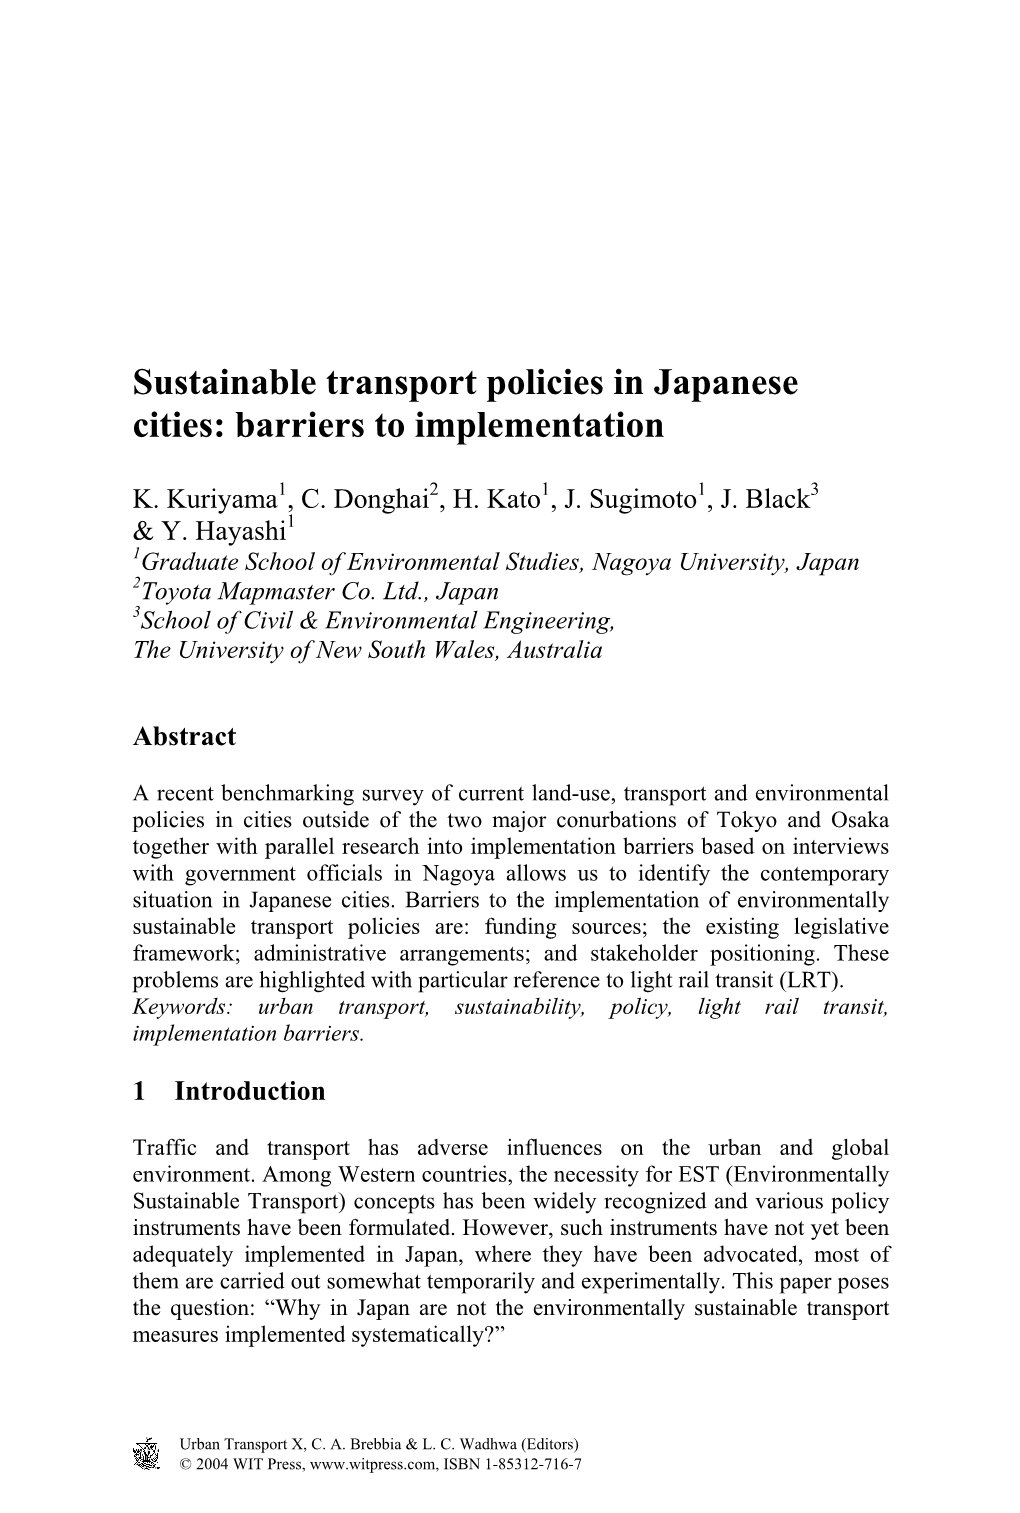 Sustainable Transport Policies in Japanese Cities: Barriers to Implementation